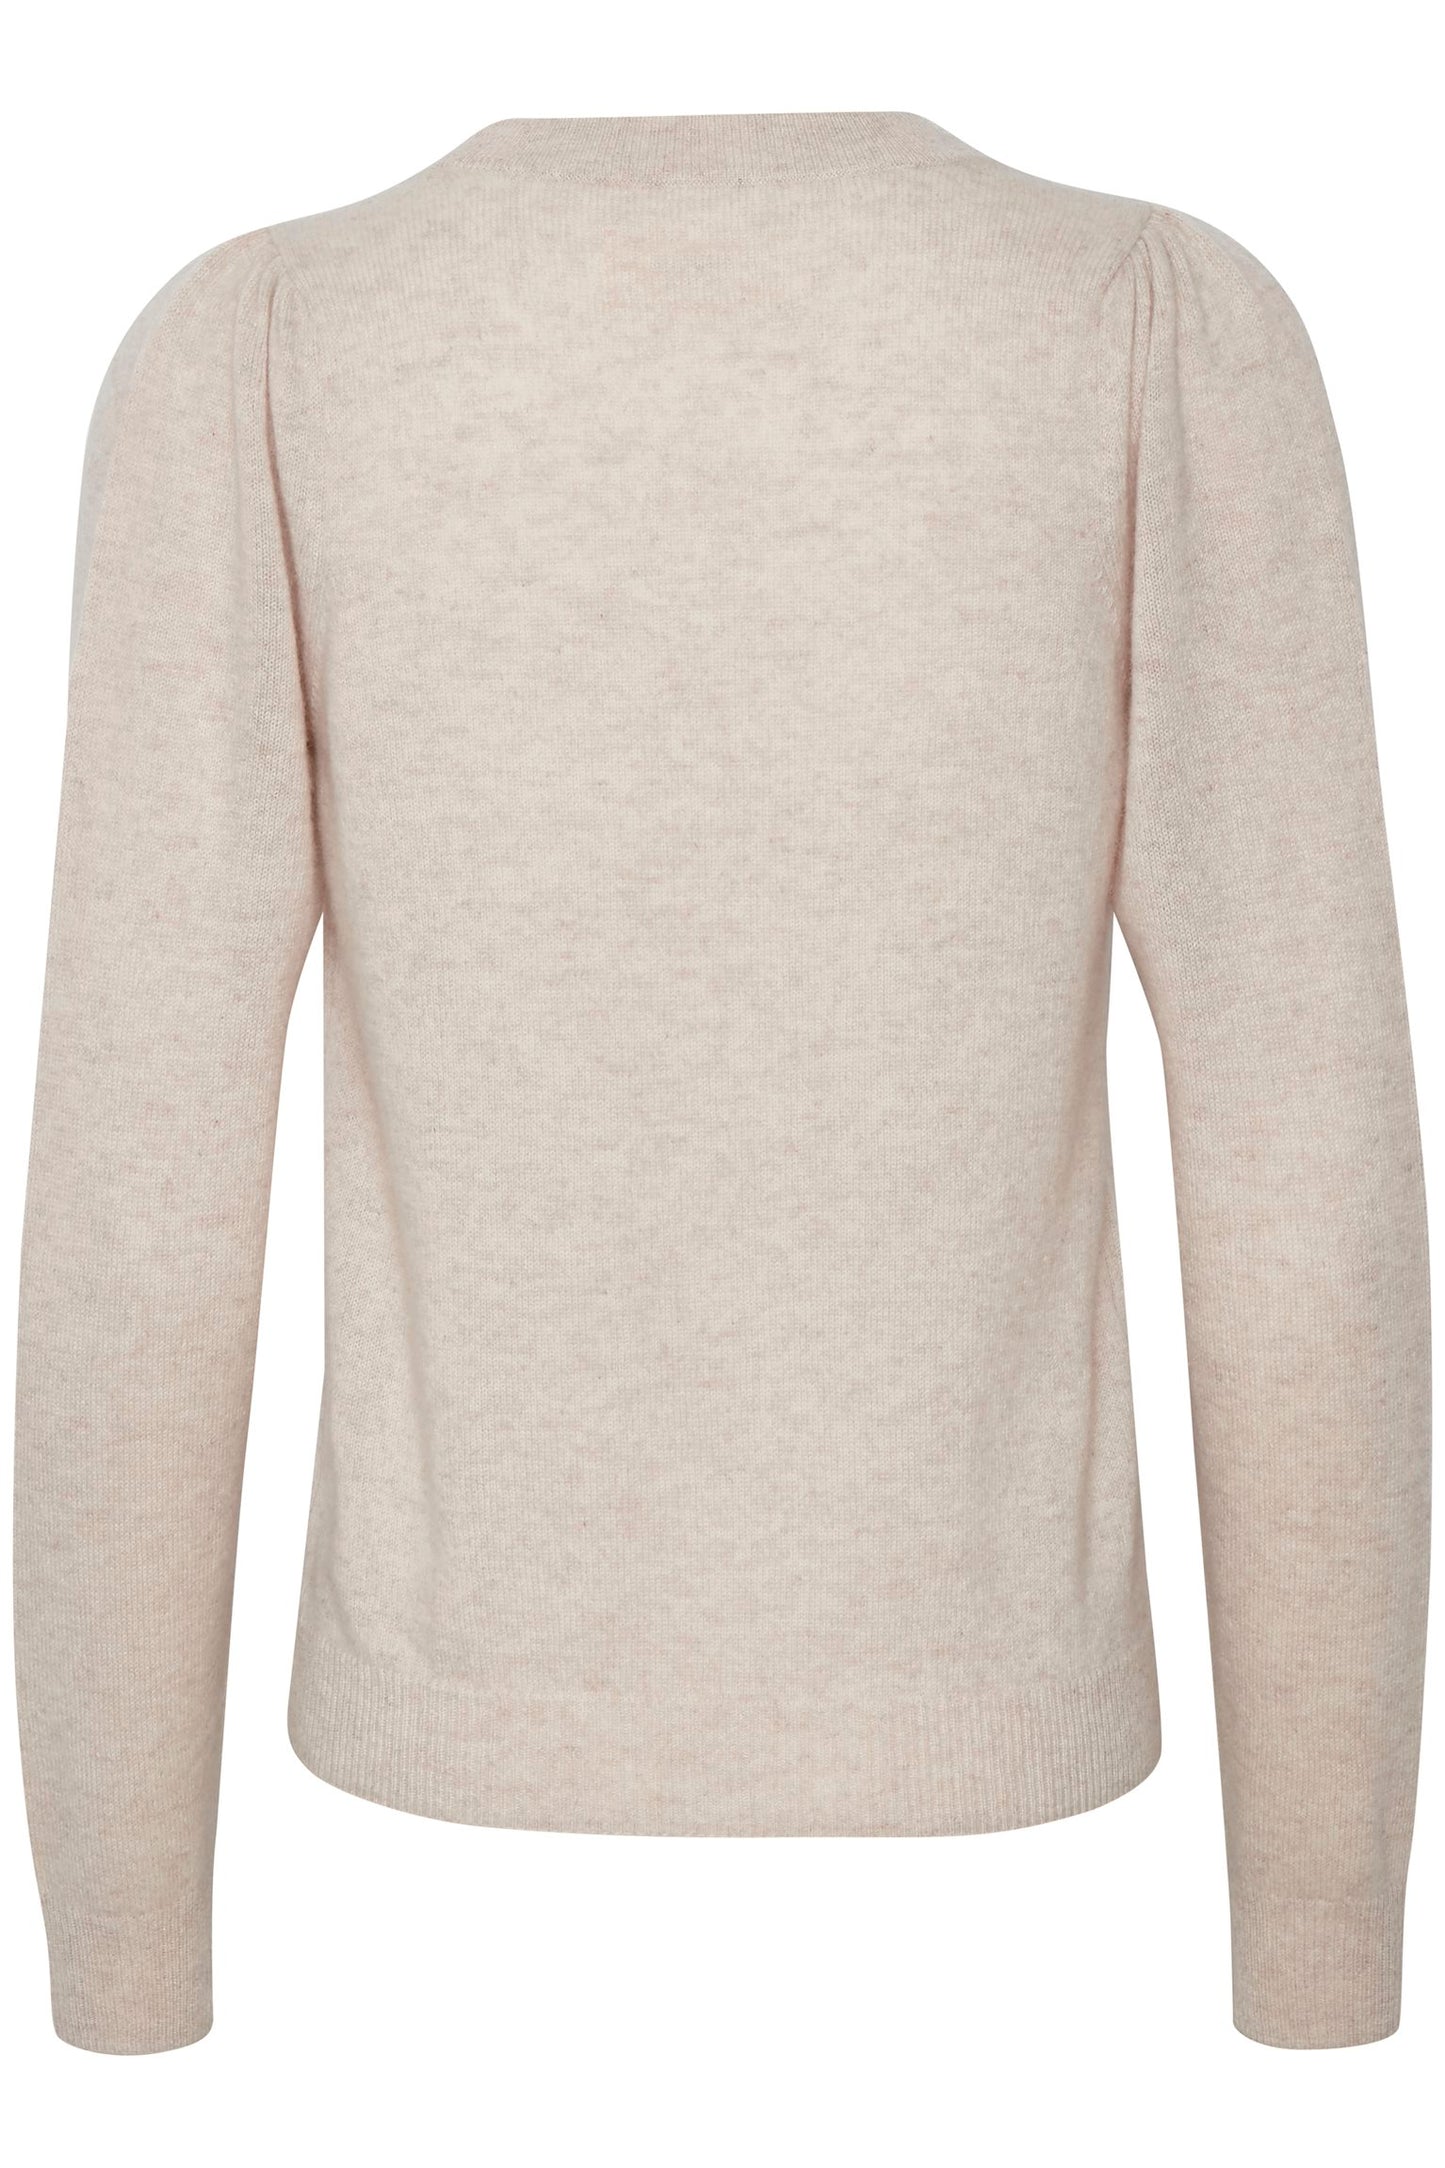 Evina 100% Cashmere knit - Part Two